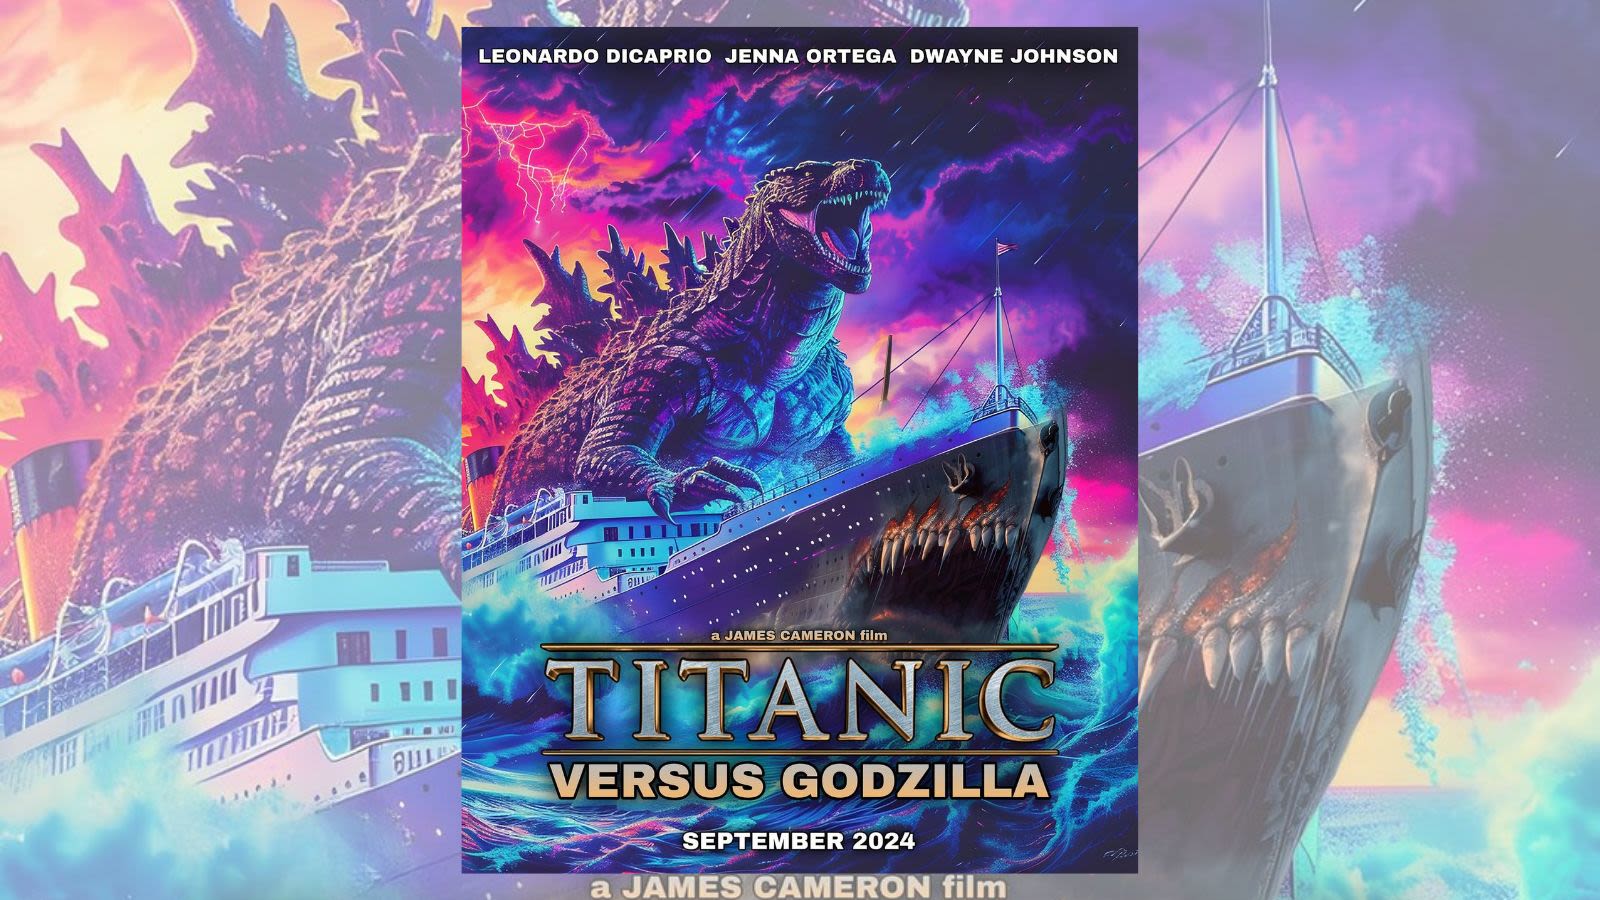 'Titanic Versus Godzilla' Movie Is Coming from Director James Cameron?